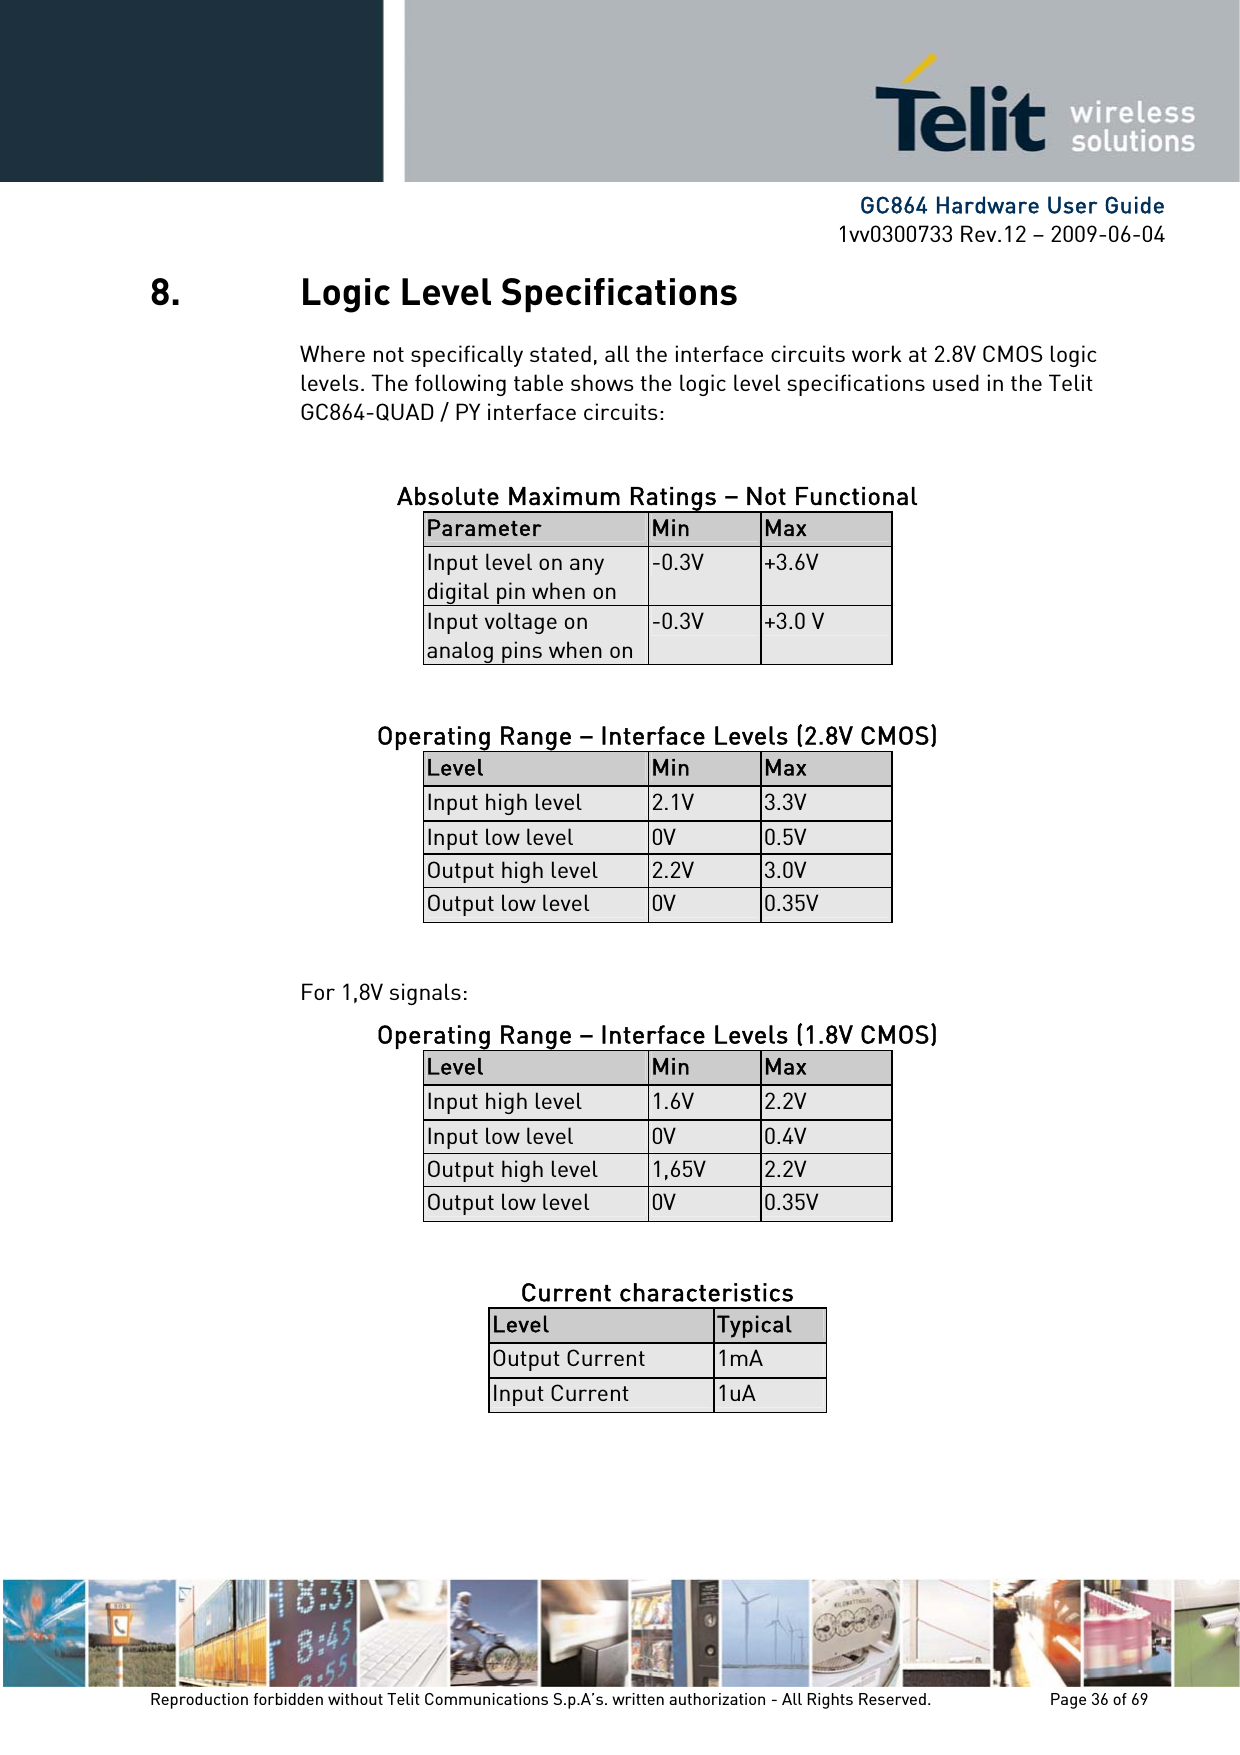      GC864 Hardware User Guide 1vv0300733 Rev.12 – 2009-06-04 8. Logic Level Specifications Where not specifically stated, all the interface circuits work at 2.8V CMOS logic levels. The following table shows the logic level specifications used in the Telit GC864-QUAD / PY interface circuits:  Absolute Maximum Ratings – Not Functional Parameter  Min  Max Input level on any digital pin when on -0.3V  +3.6V Input voltage on analog pins when on-0.3V  +3.0 V  Operating Range – Interface Levels (2.8V CMOS) Level  Min  Max Input high level  2.1V  3.3V Input low level  0V  0.5V Output high level  2.2V  3.0V Output low level  0V  0.35V  For 1,8V signals: Operating Range – Interface Levels (1.8V CMOS) Level  Min  Max Input high level  1.6V  2.2V Input low level  0V  0.4V Output high level  1,65V  2.2V Output low level  0V  0.35V  Current characteristics Level  Typical Output Current  1mA Input Current  1uA Reproduction forbidden without Telit Communications S.p.A’s. written authorization - All Rights Reserved.    Page 36 of 69  